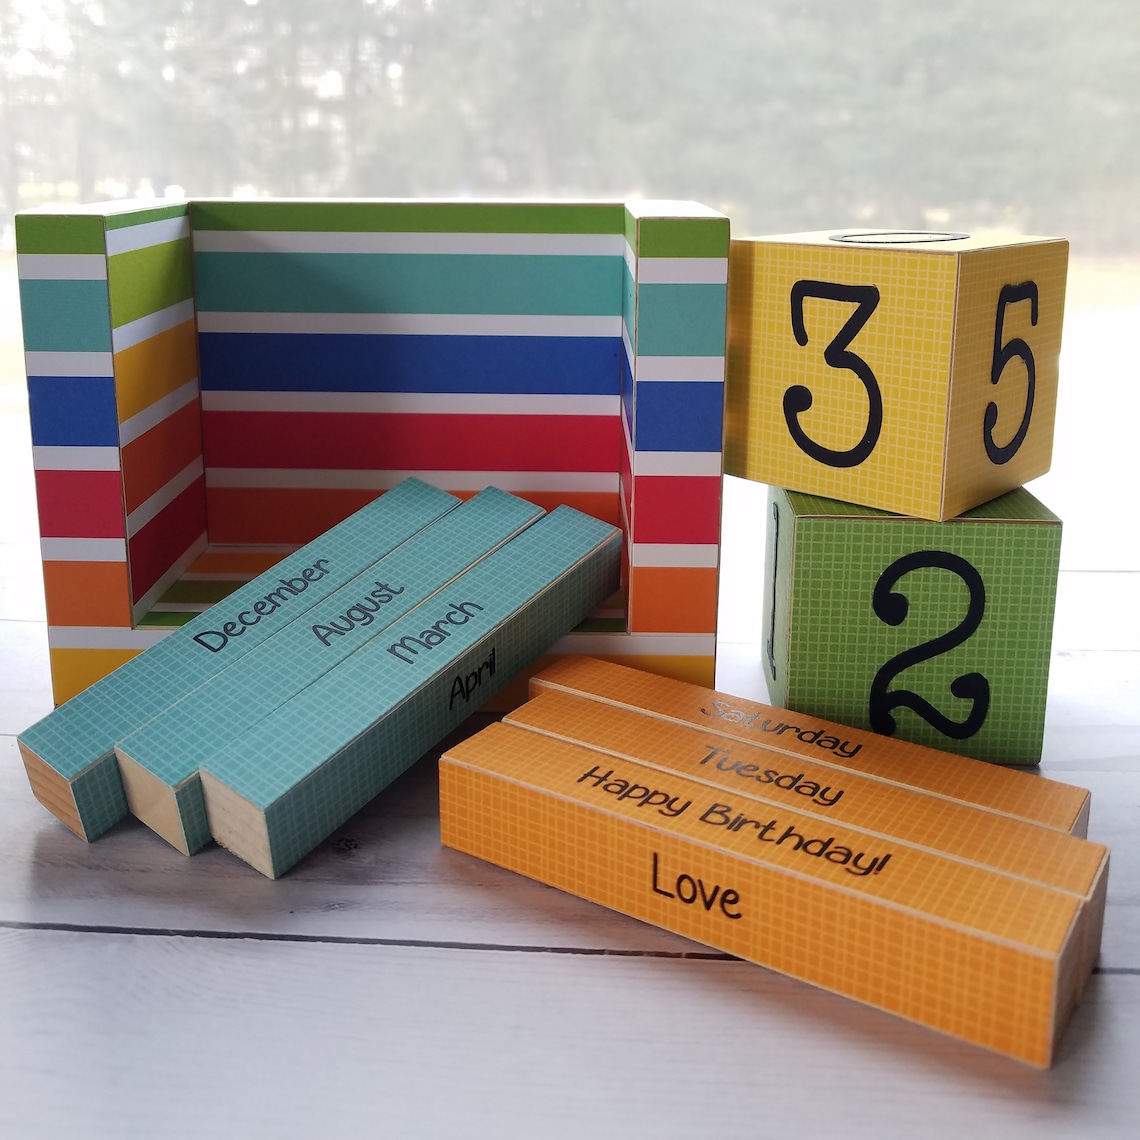 Handmade Wooden Block Perpetual Calendar Month and Day Etsy